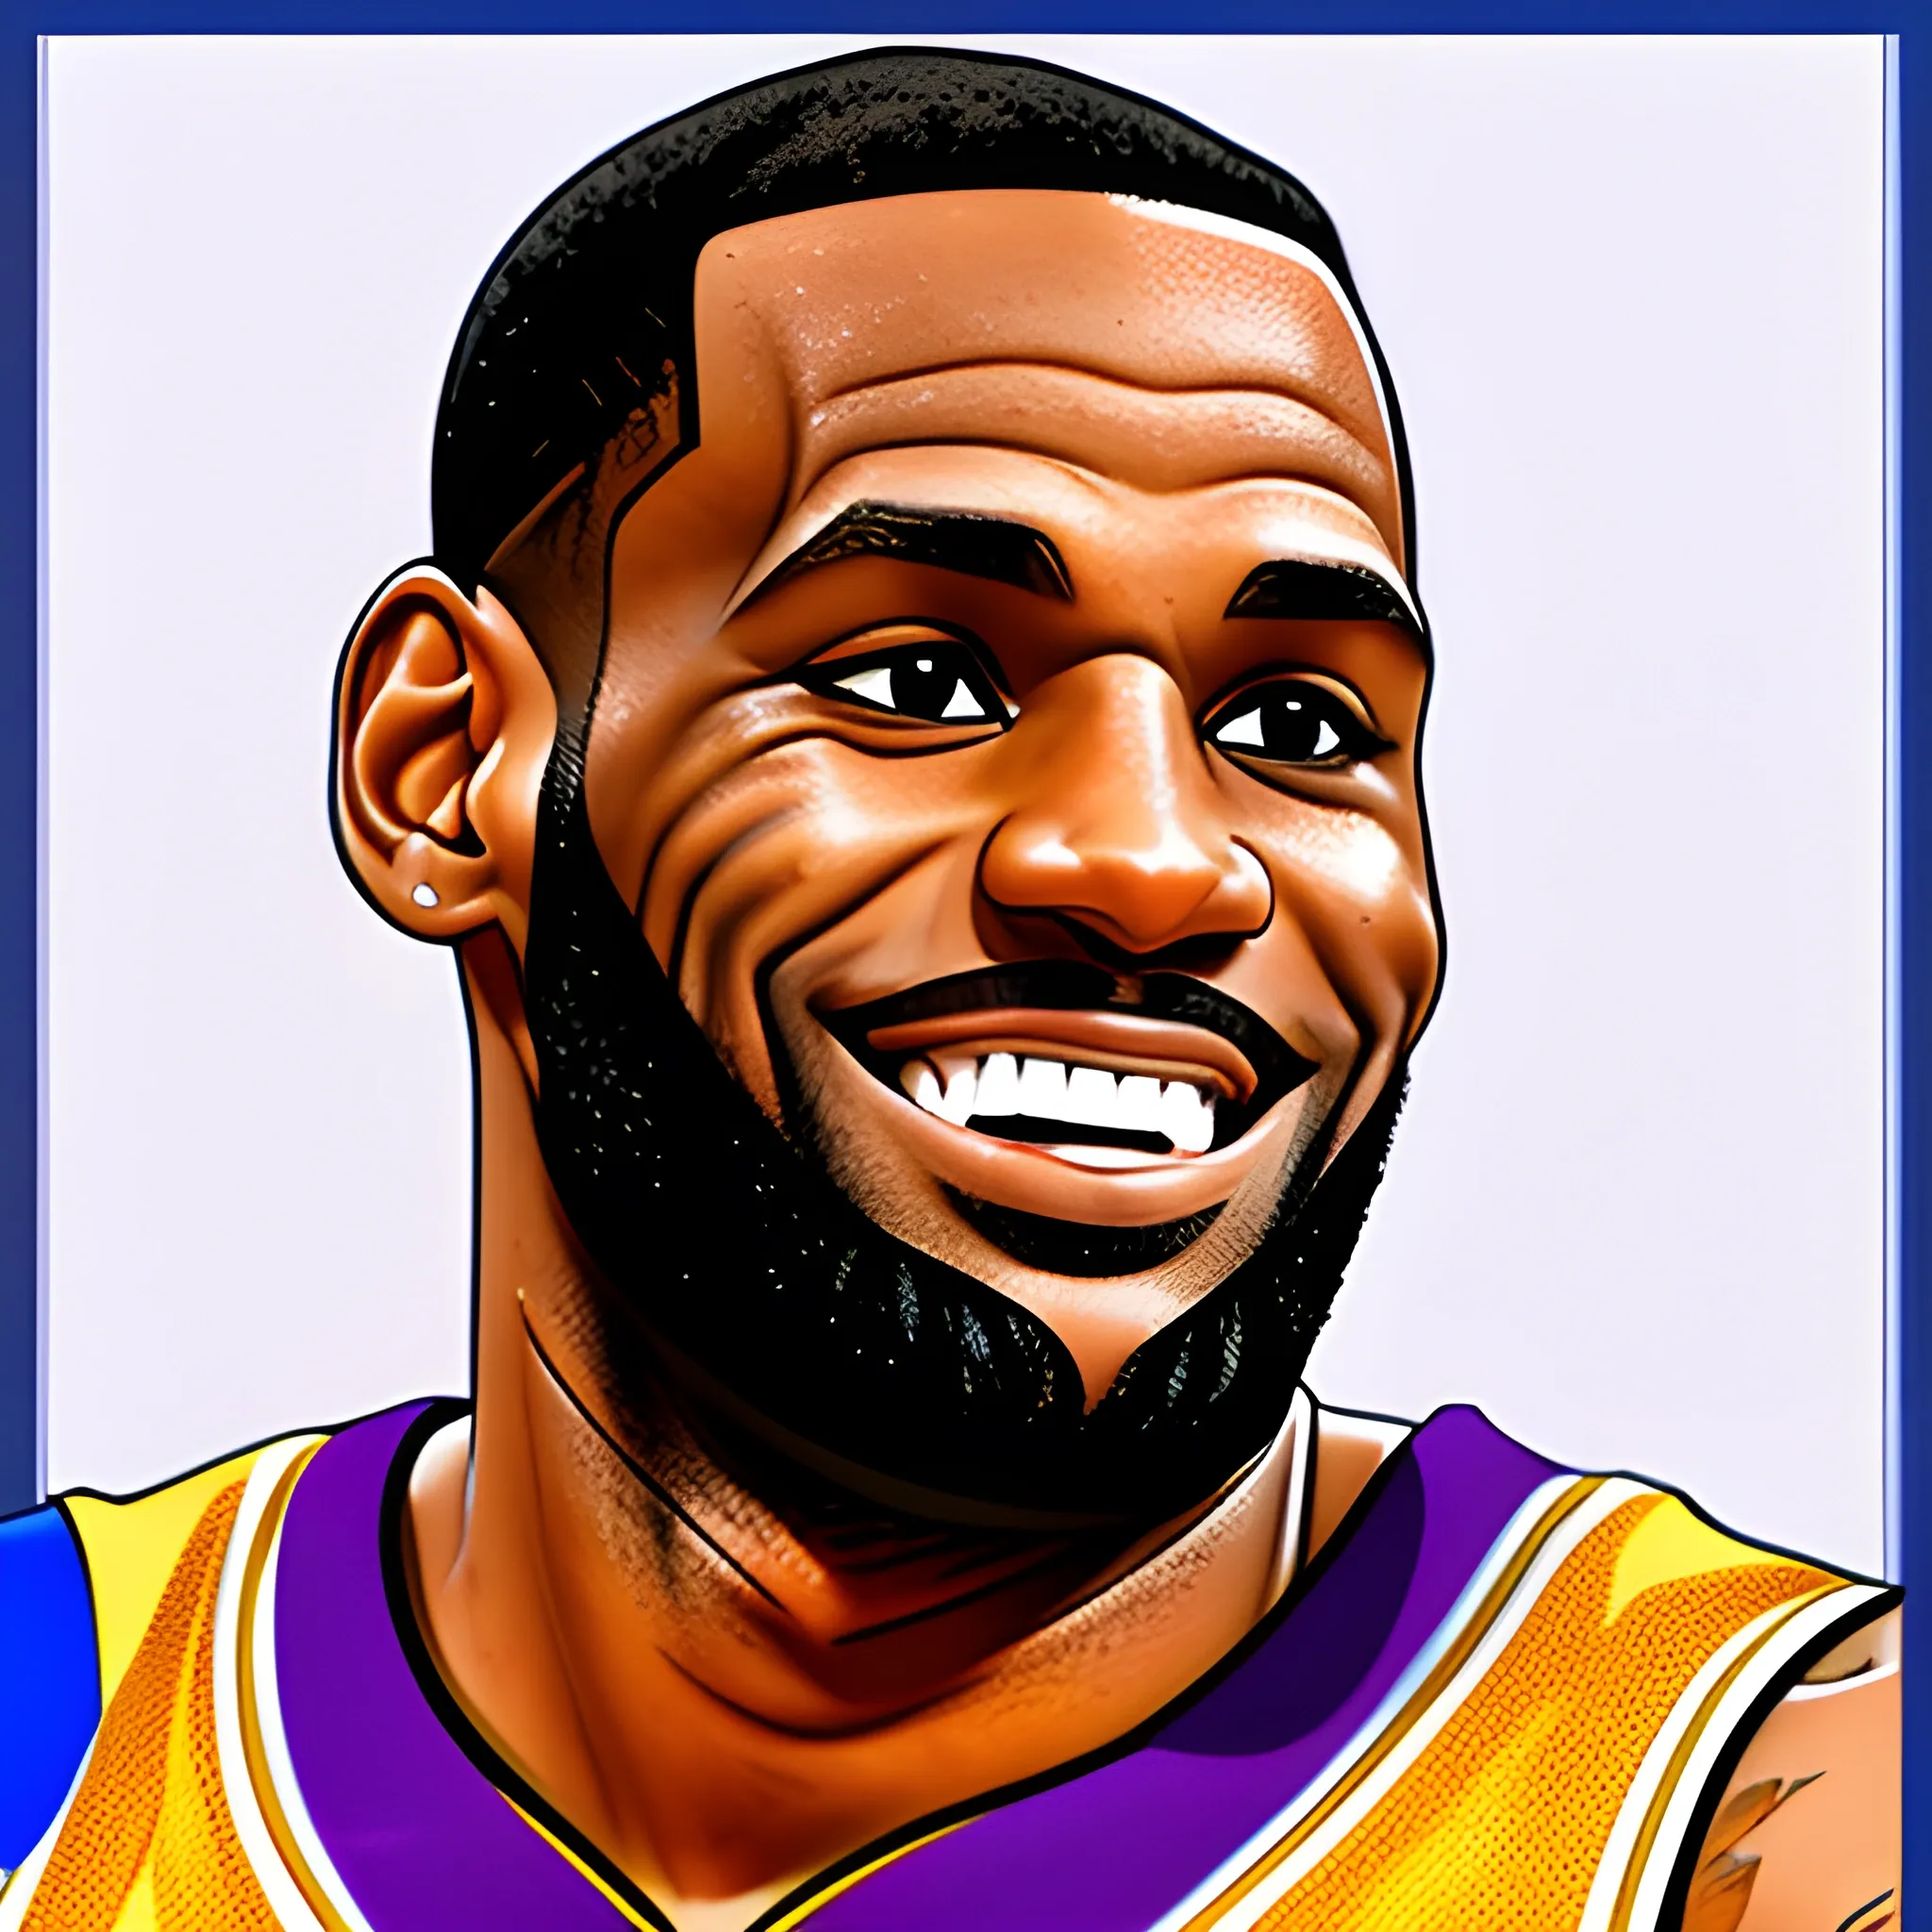 Cartoon Digital Art of Lebron James smiling at the camera in a Lakers jersey icon with transparent background, Cartoon